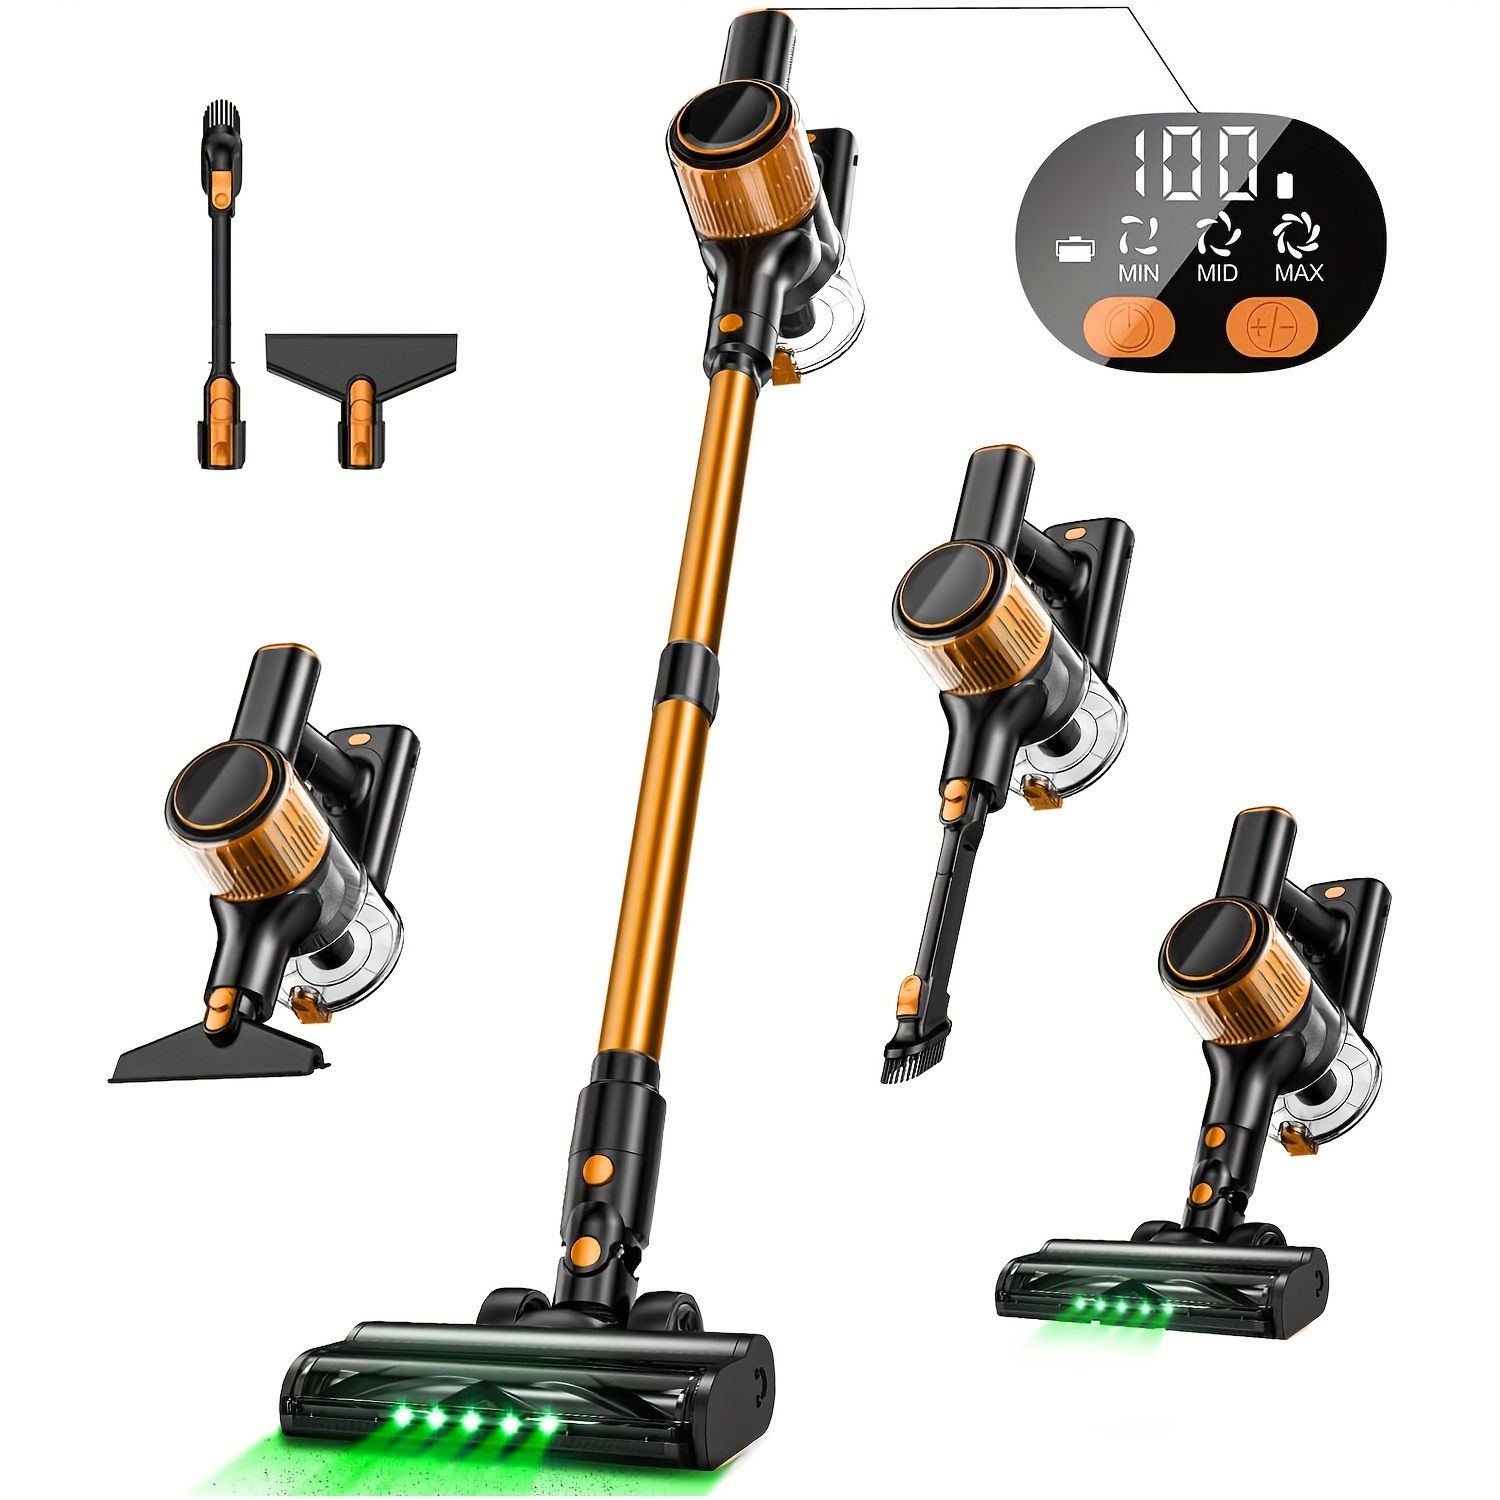 

Cordless Vacuum Cleaner, 30kpa 8 In 1 Lightweight Stick Vacuum With Sofa Brush, High-speed Motor, Anti-tangle Brush With Green Light, Rechargeable Vacuums For Hardwood Floor, Carpet, Pet Hair, Gold